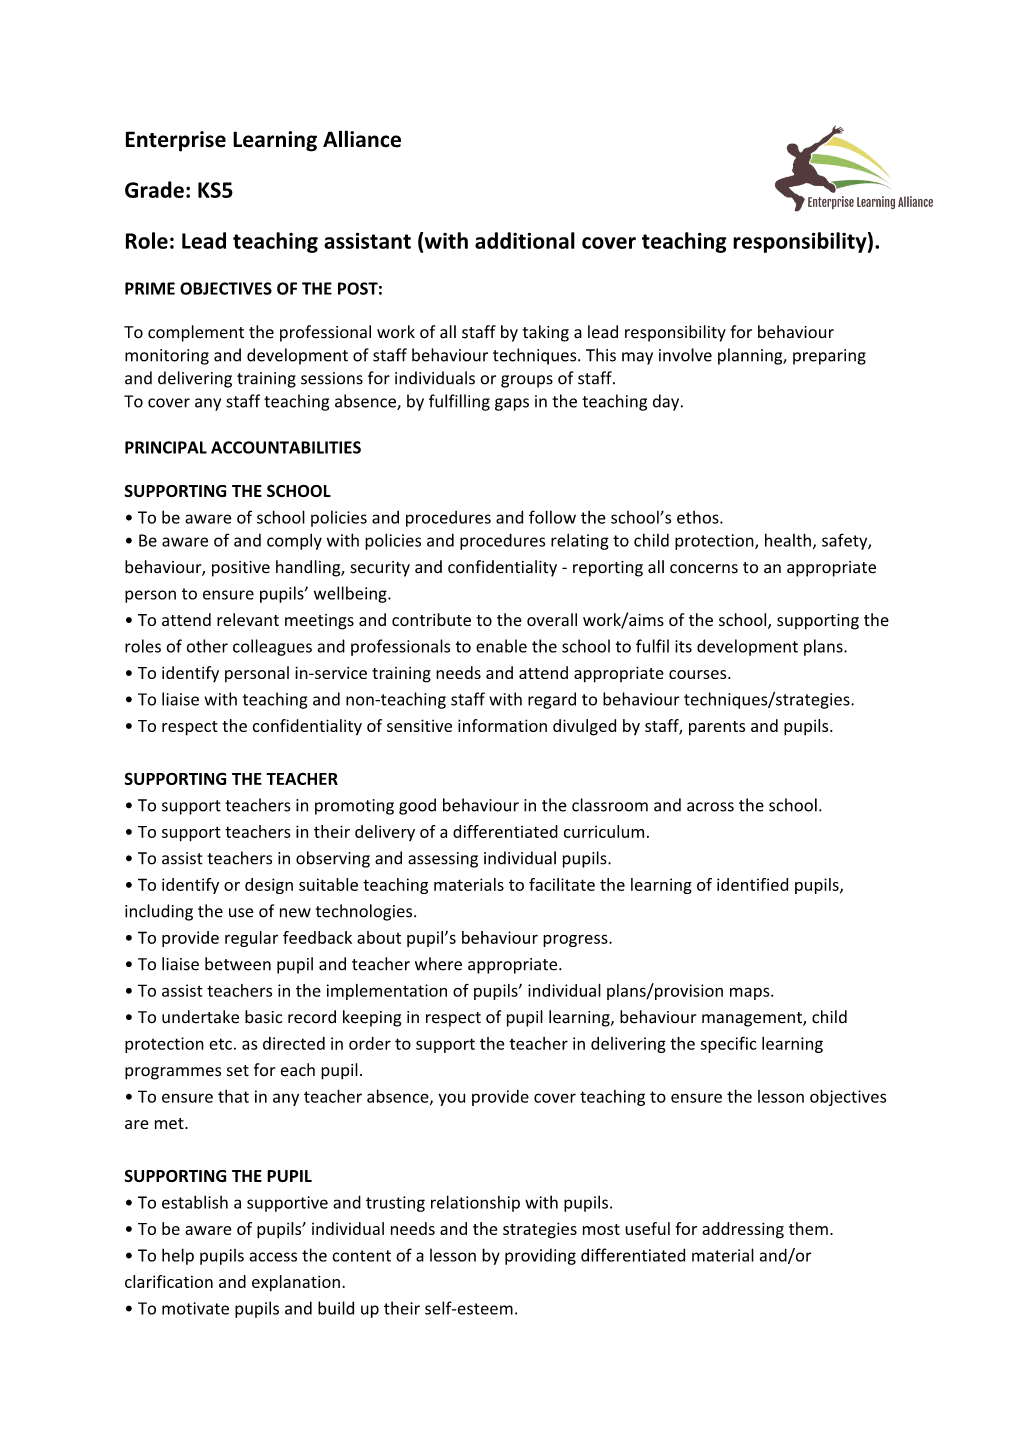 Role: Lead Teaching Assistant (With Additional Cover Teaching Responsibility)